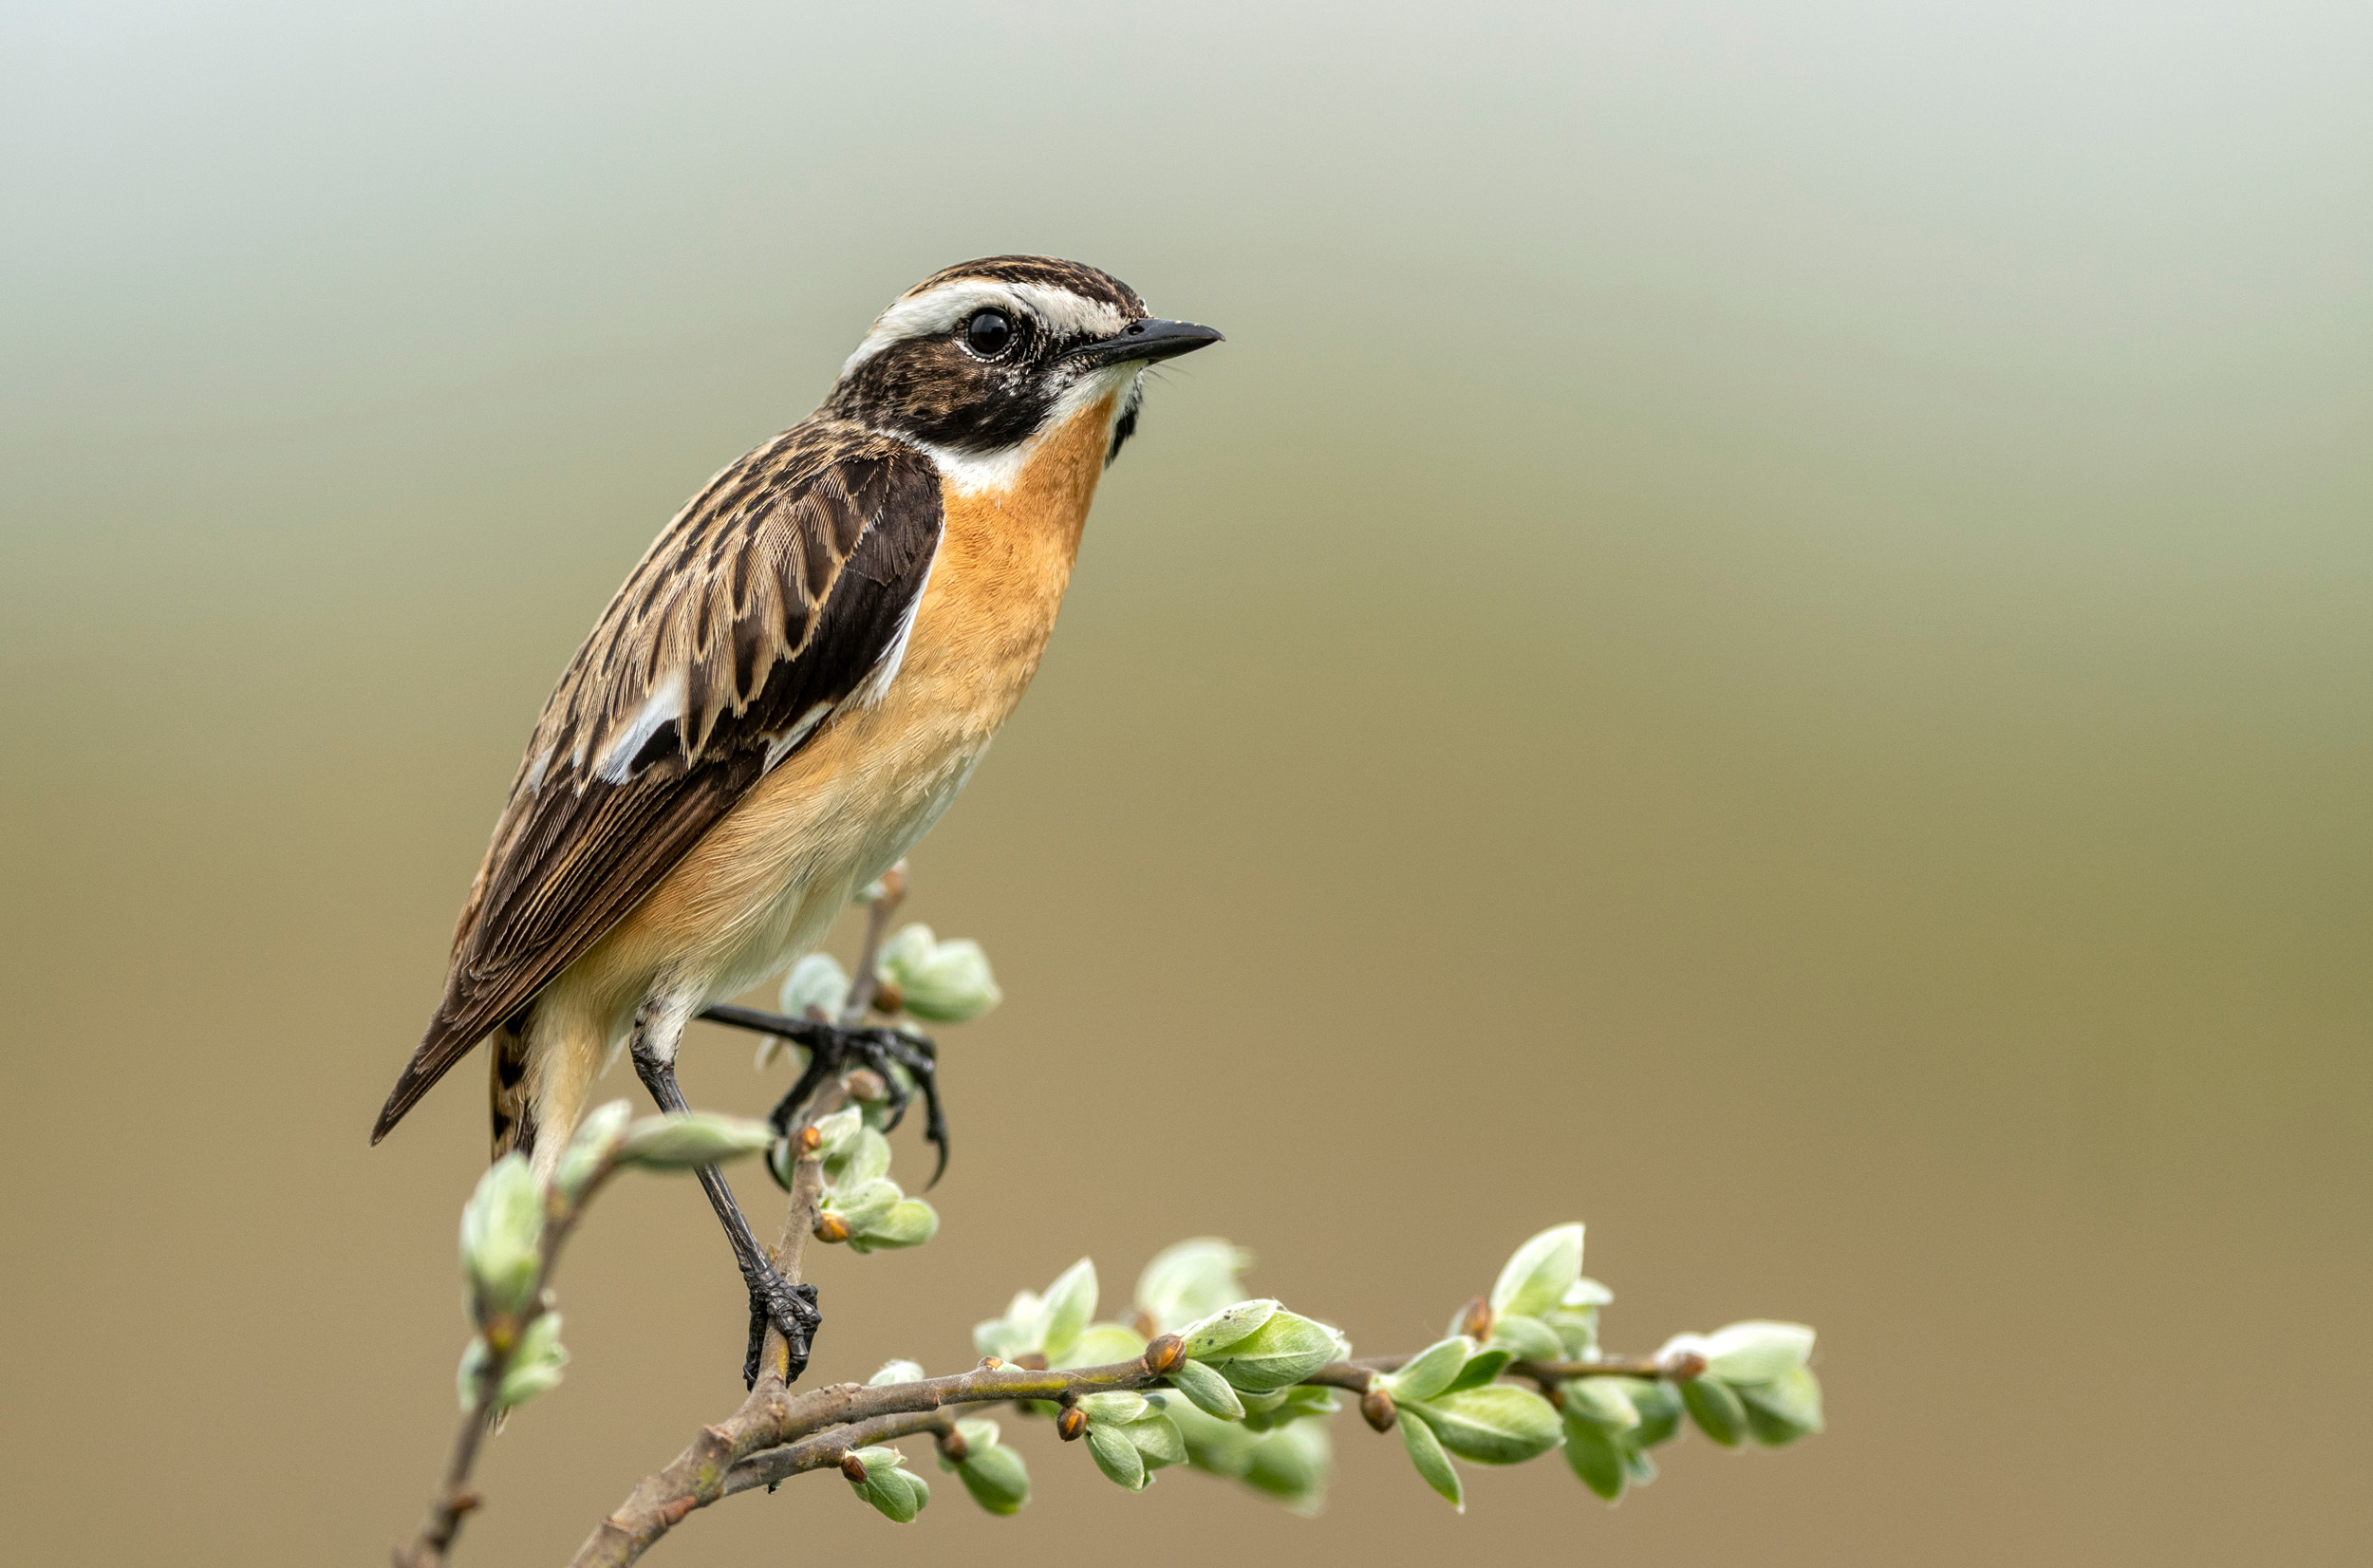 A Whinchat perched on a flower branch